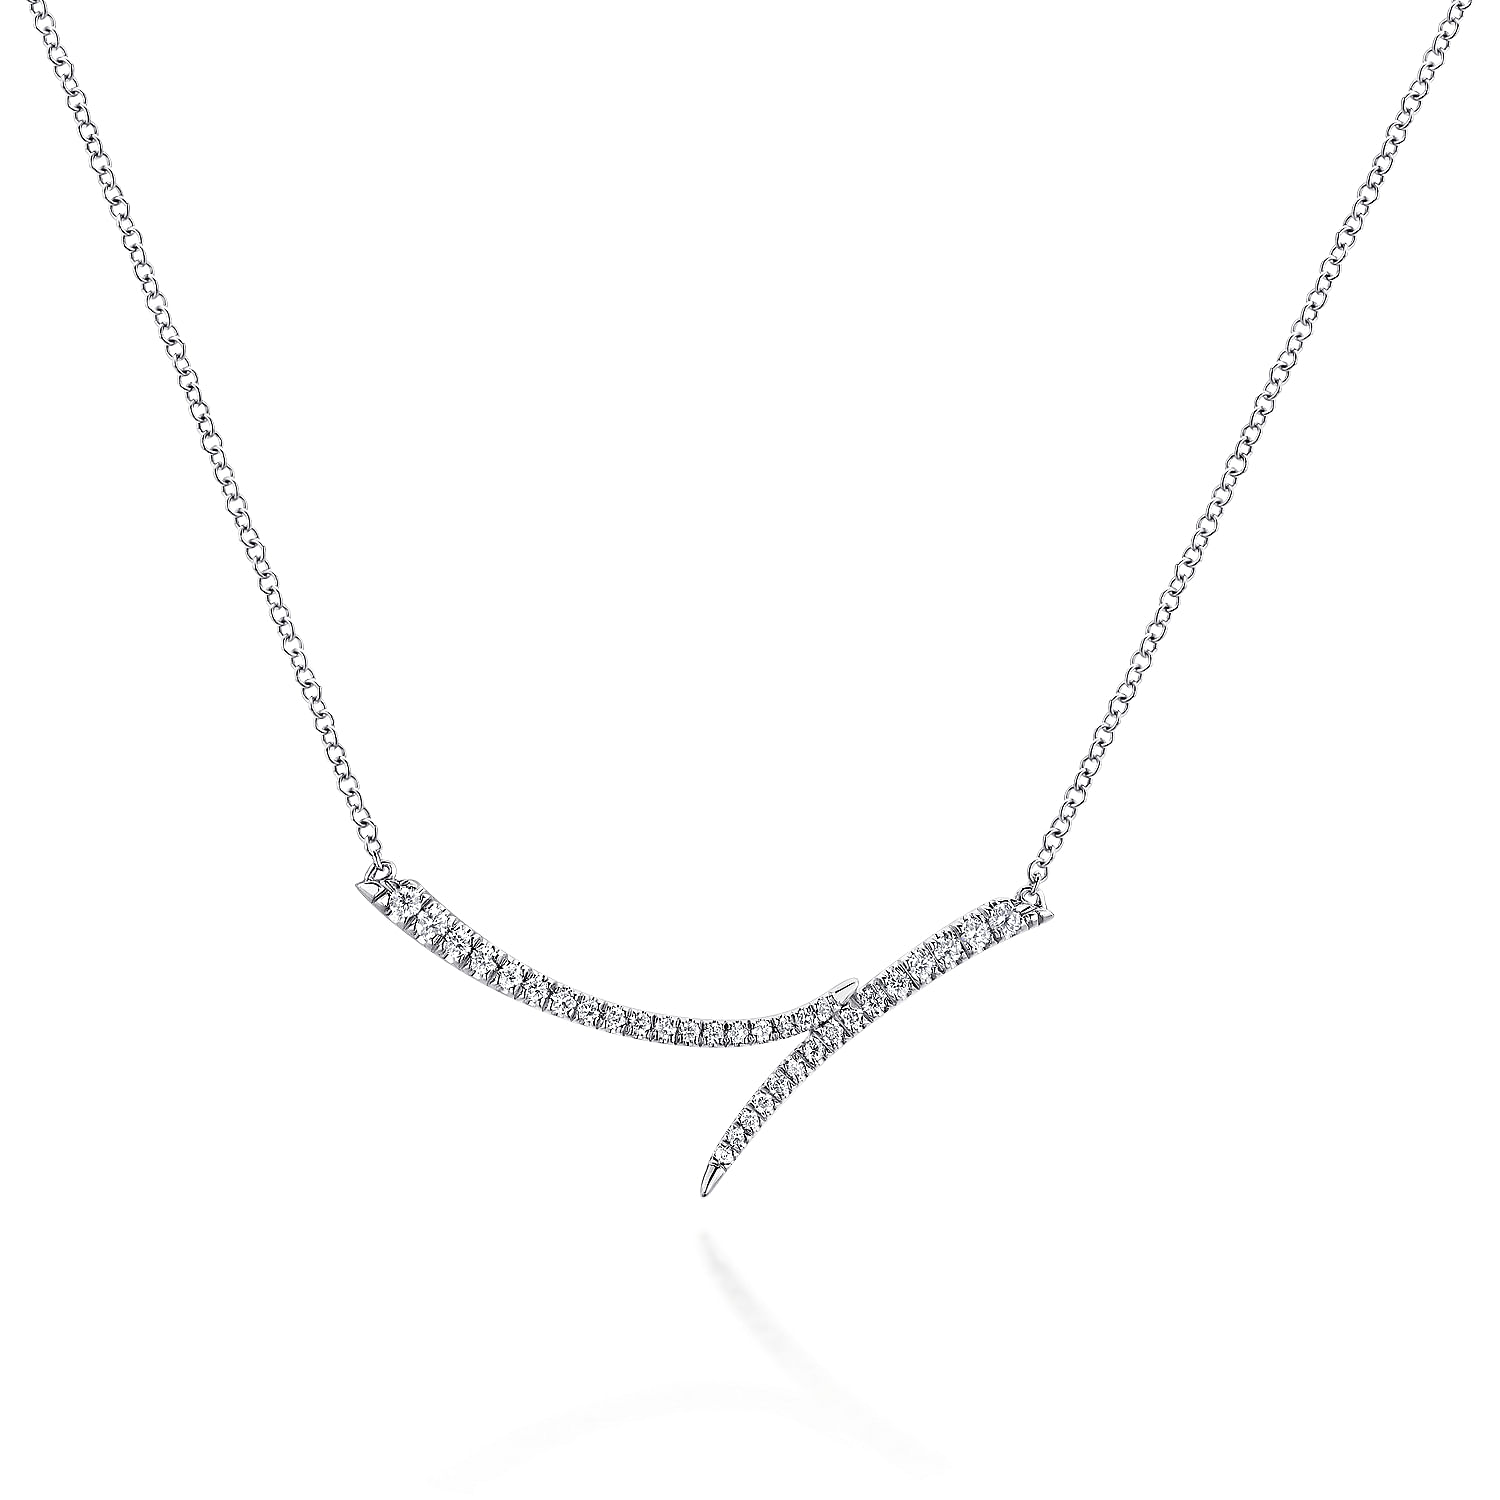 Gabriel - 14K White Gold Curved Bypass Bar Necklace with Diamonds